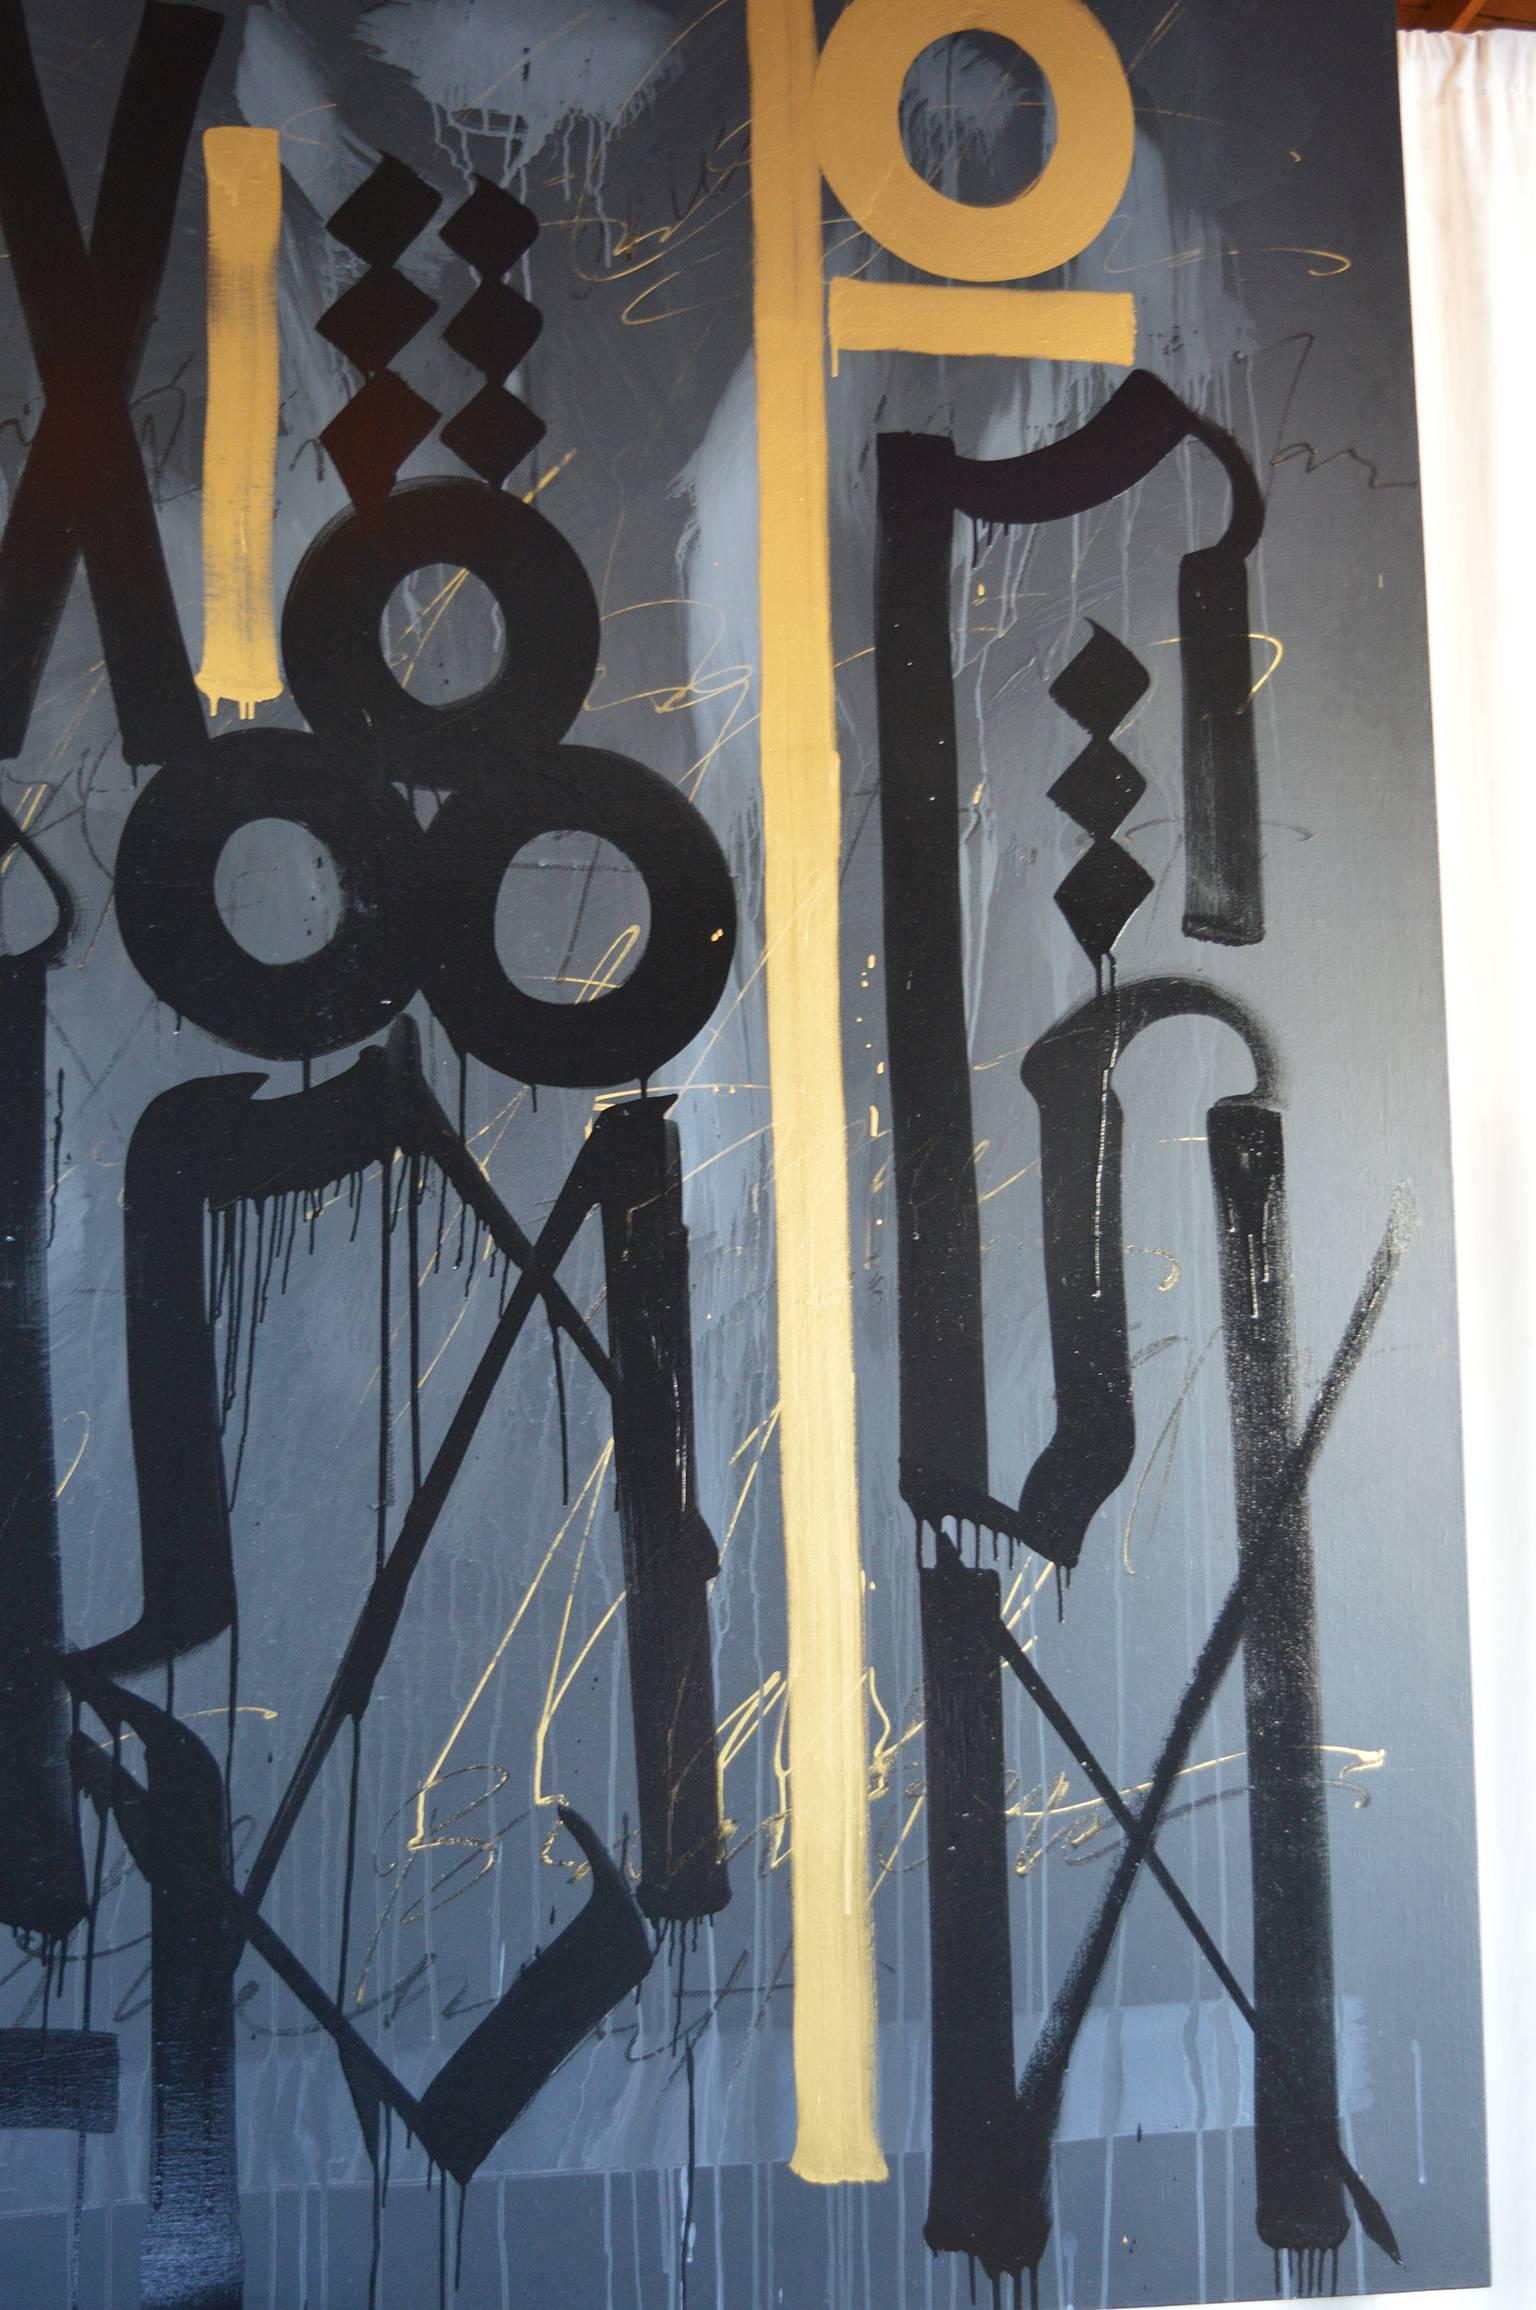 Large piece, Stranger in the Night by Retna.
Retna is a contemporary artist, primarily recognized for graffiti art. Retna combines visual linguistics, urban poetics and appropriated fashion imagery to explore an eclectic range of media, including